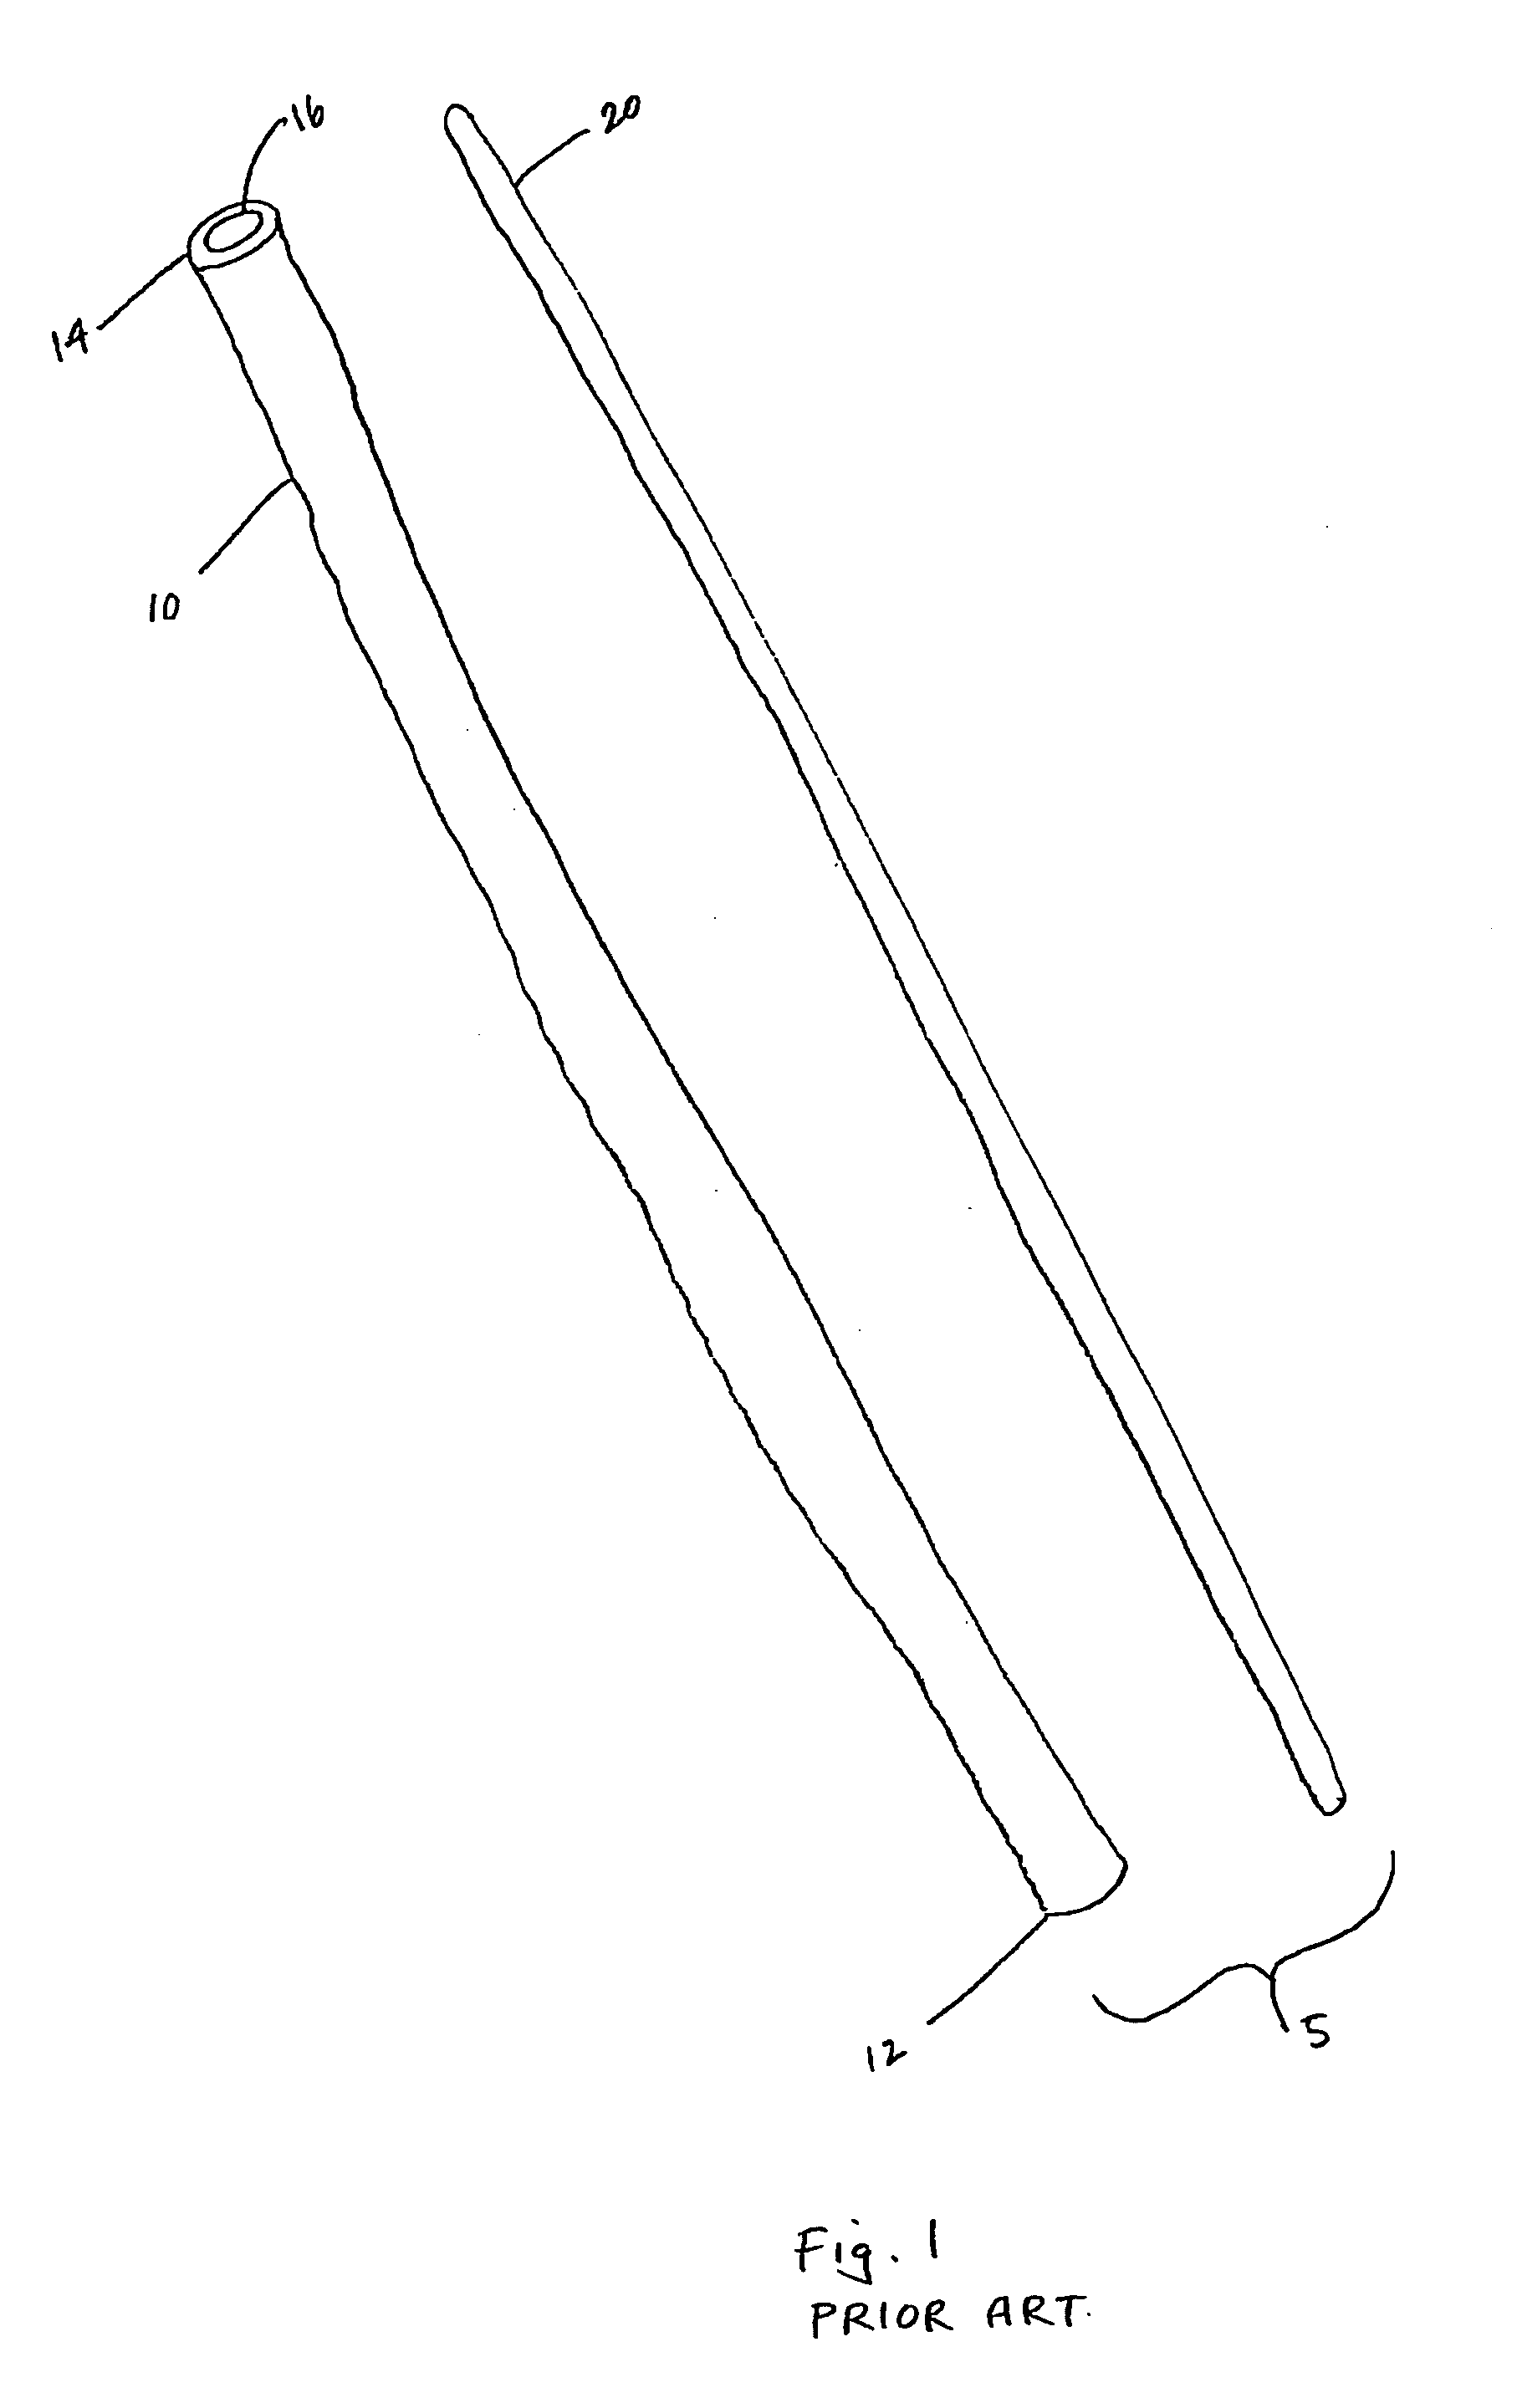 Ventilating tube and stylet system